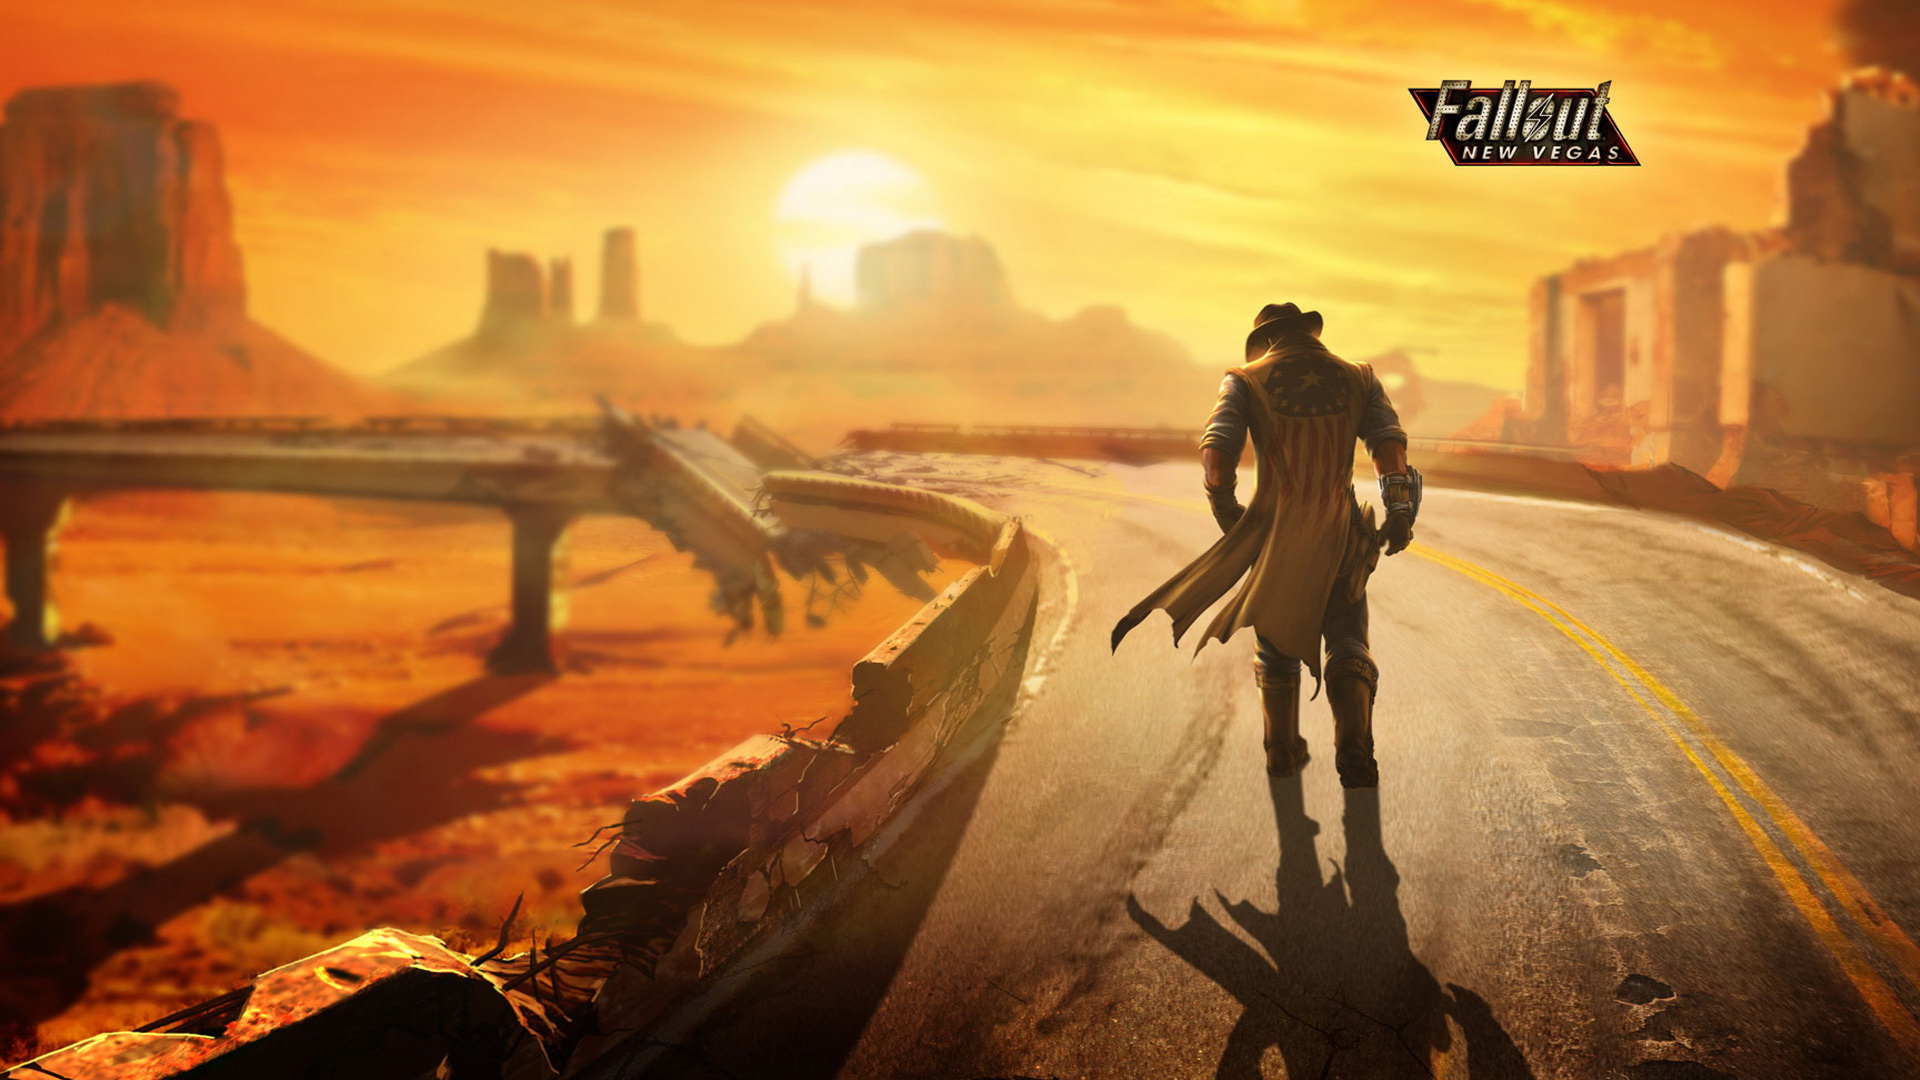 Fallout New Vegas Lonesome Road Wallpaper Pc Game HD